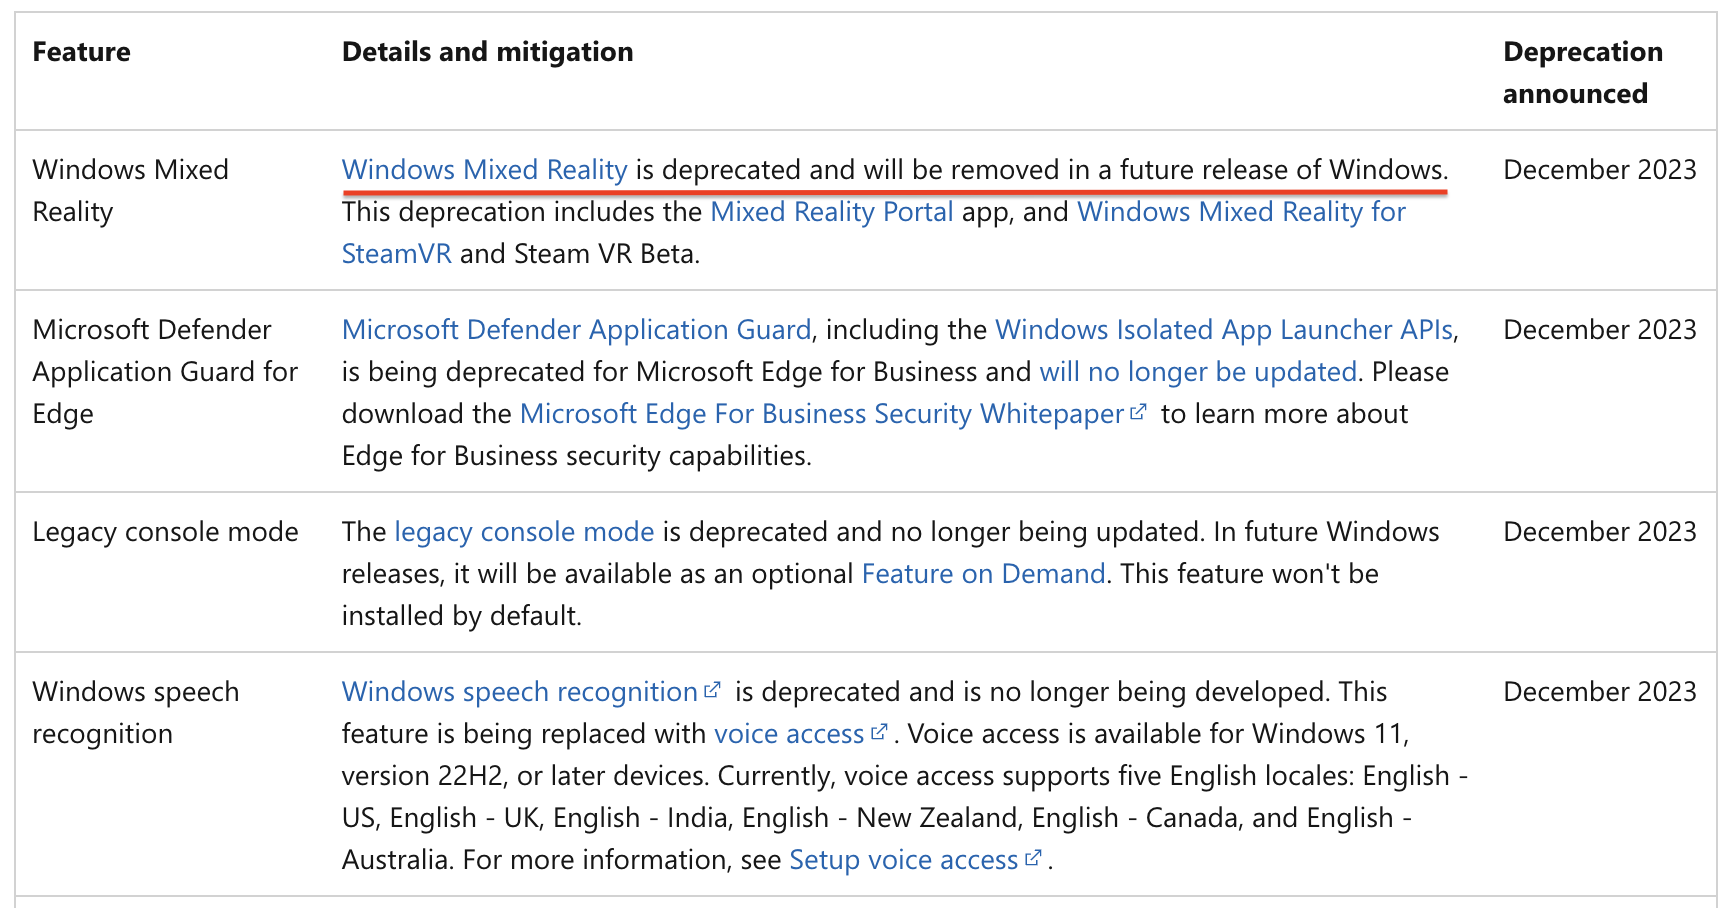 Windows Mixed Reality is deprecated and will be removed in the next release of Windows-2